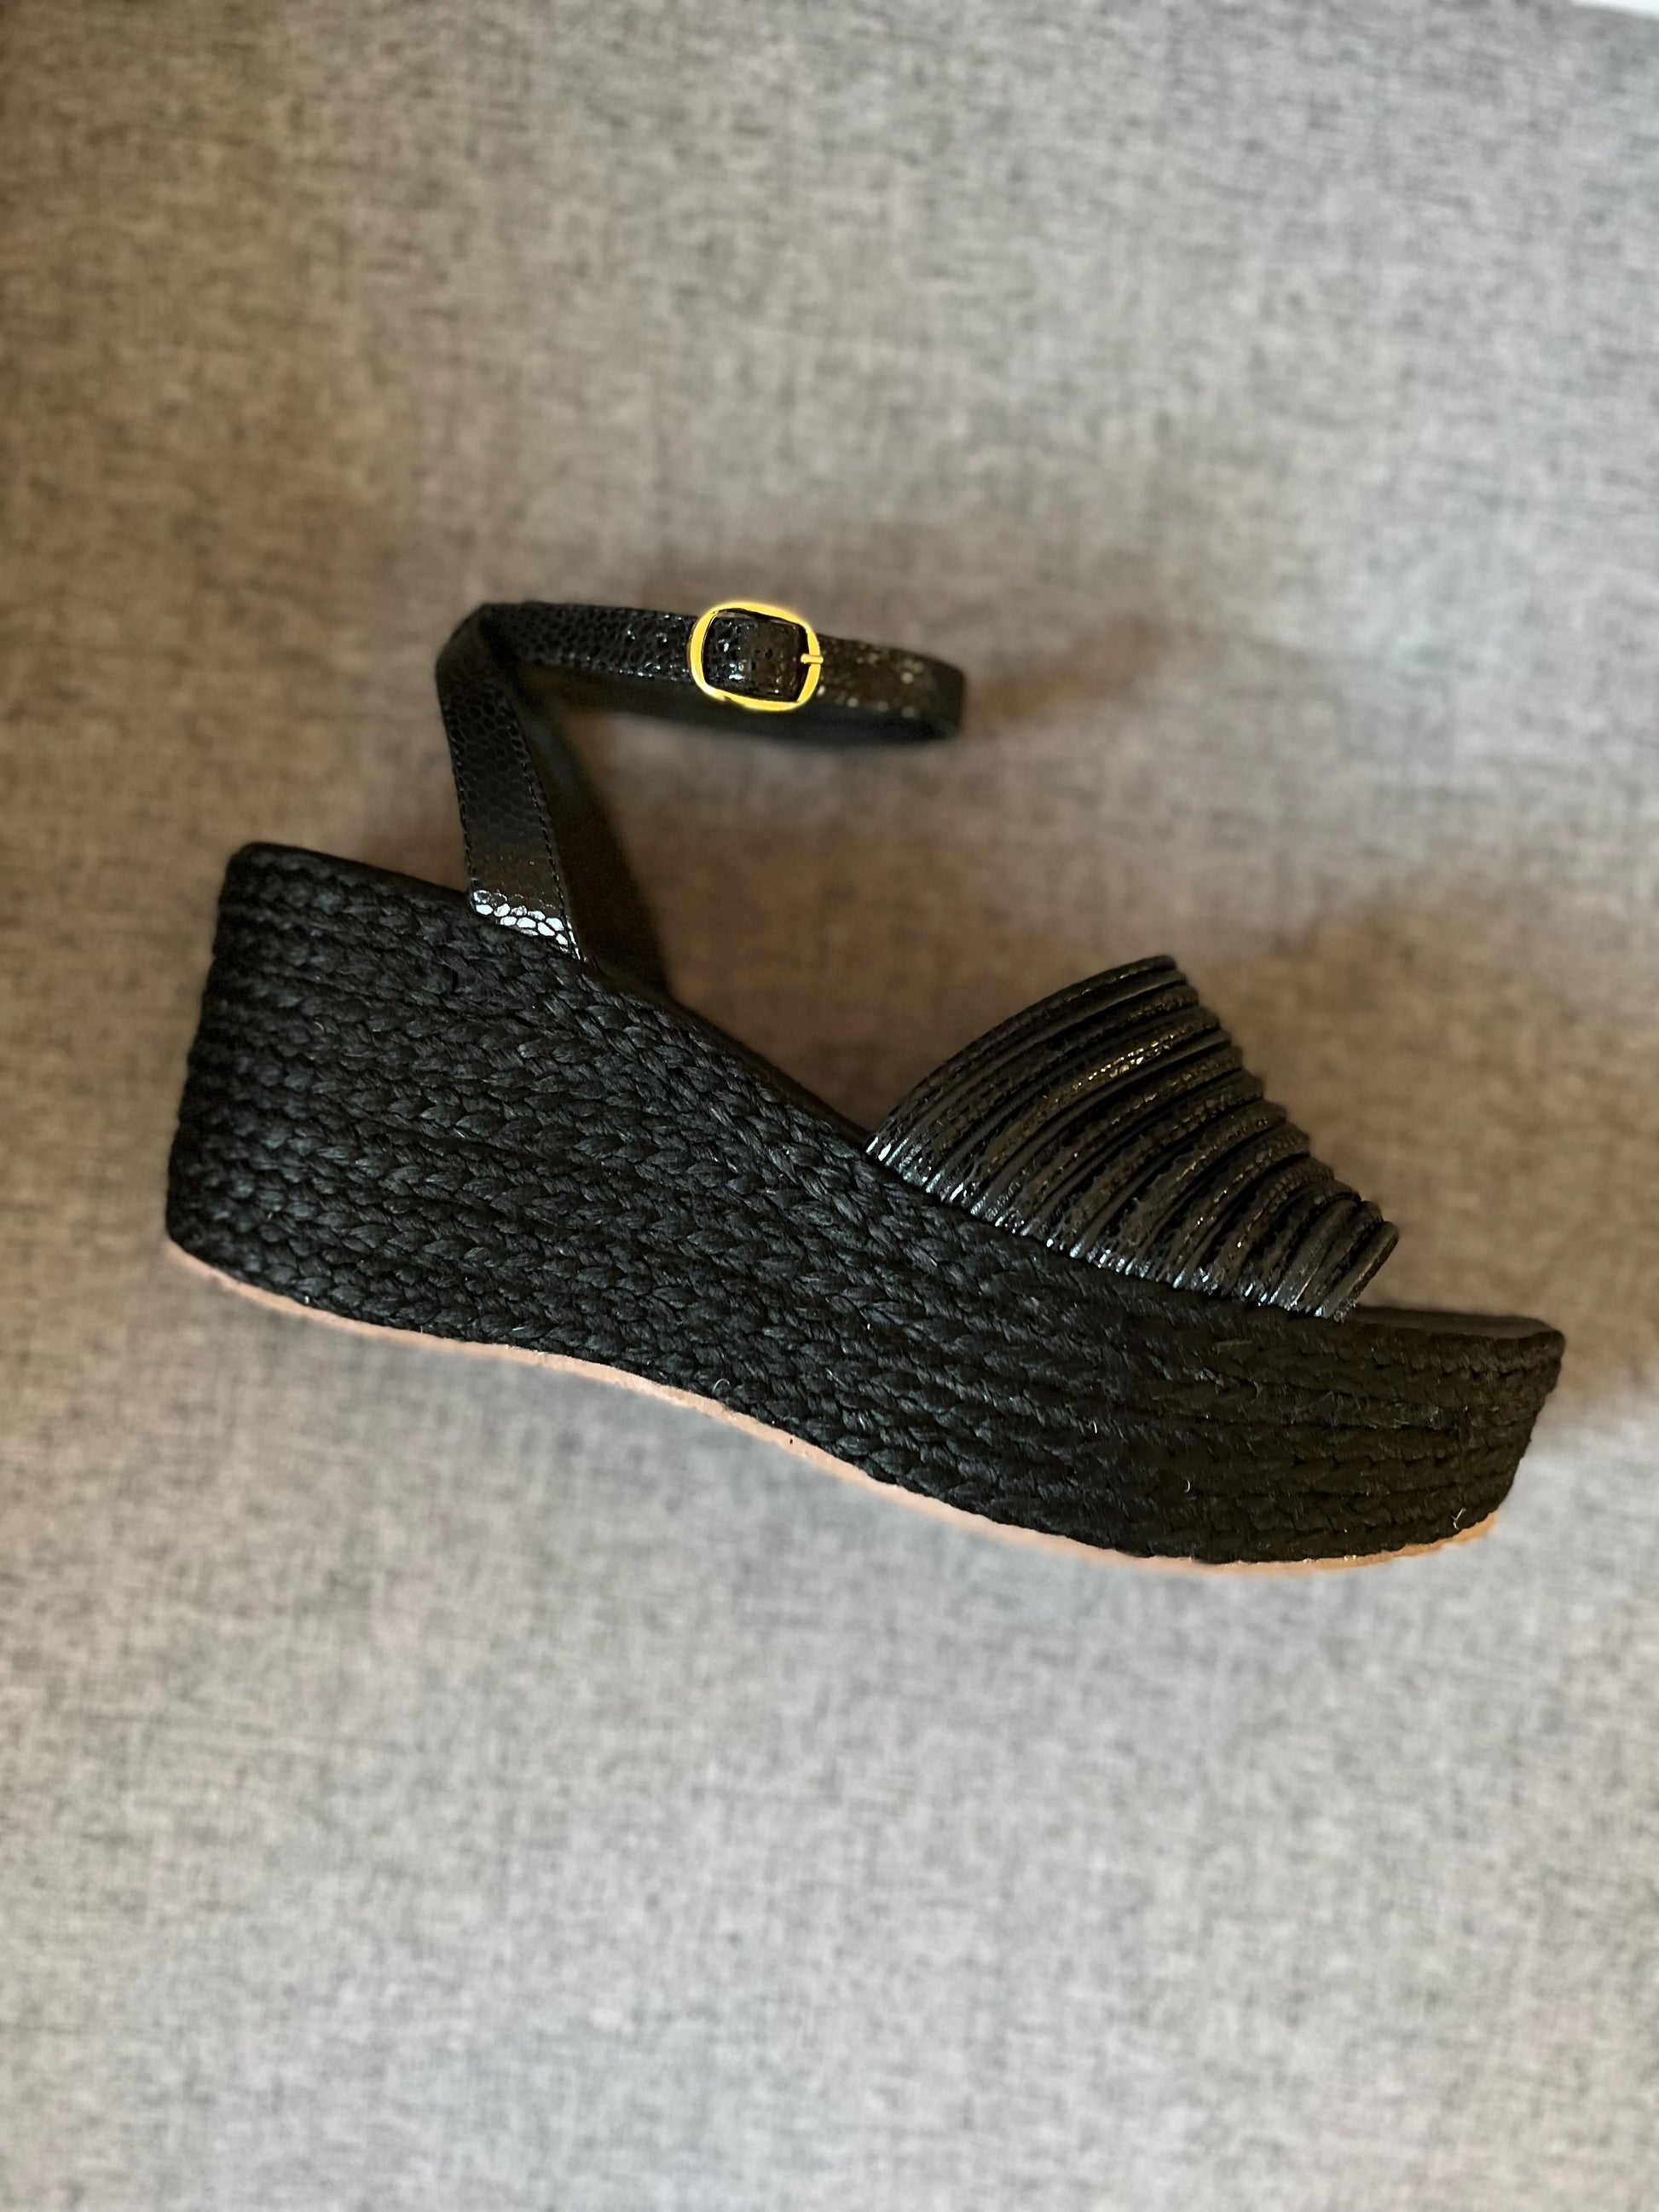 Black Holly Espadrilles Low High by Nataly Mendez Upper material genuine leather Insole lining made of leather Flexible rubber sole Hand Made 3 inch heel height 1.75 inch platform